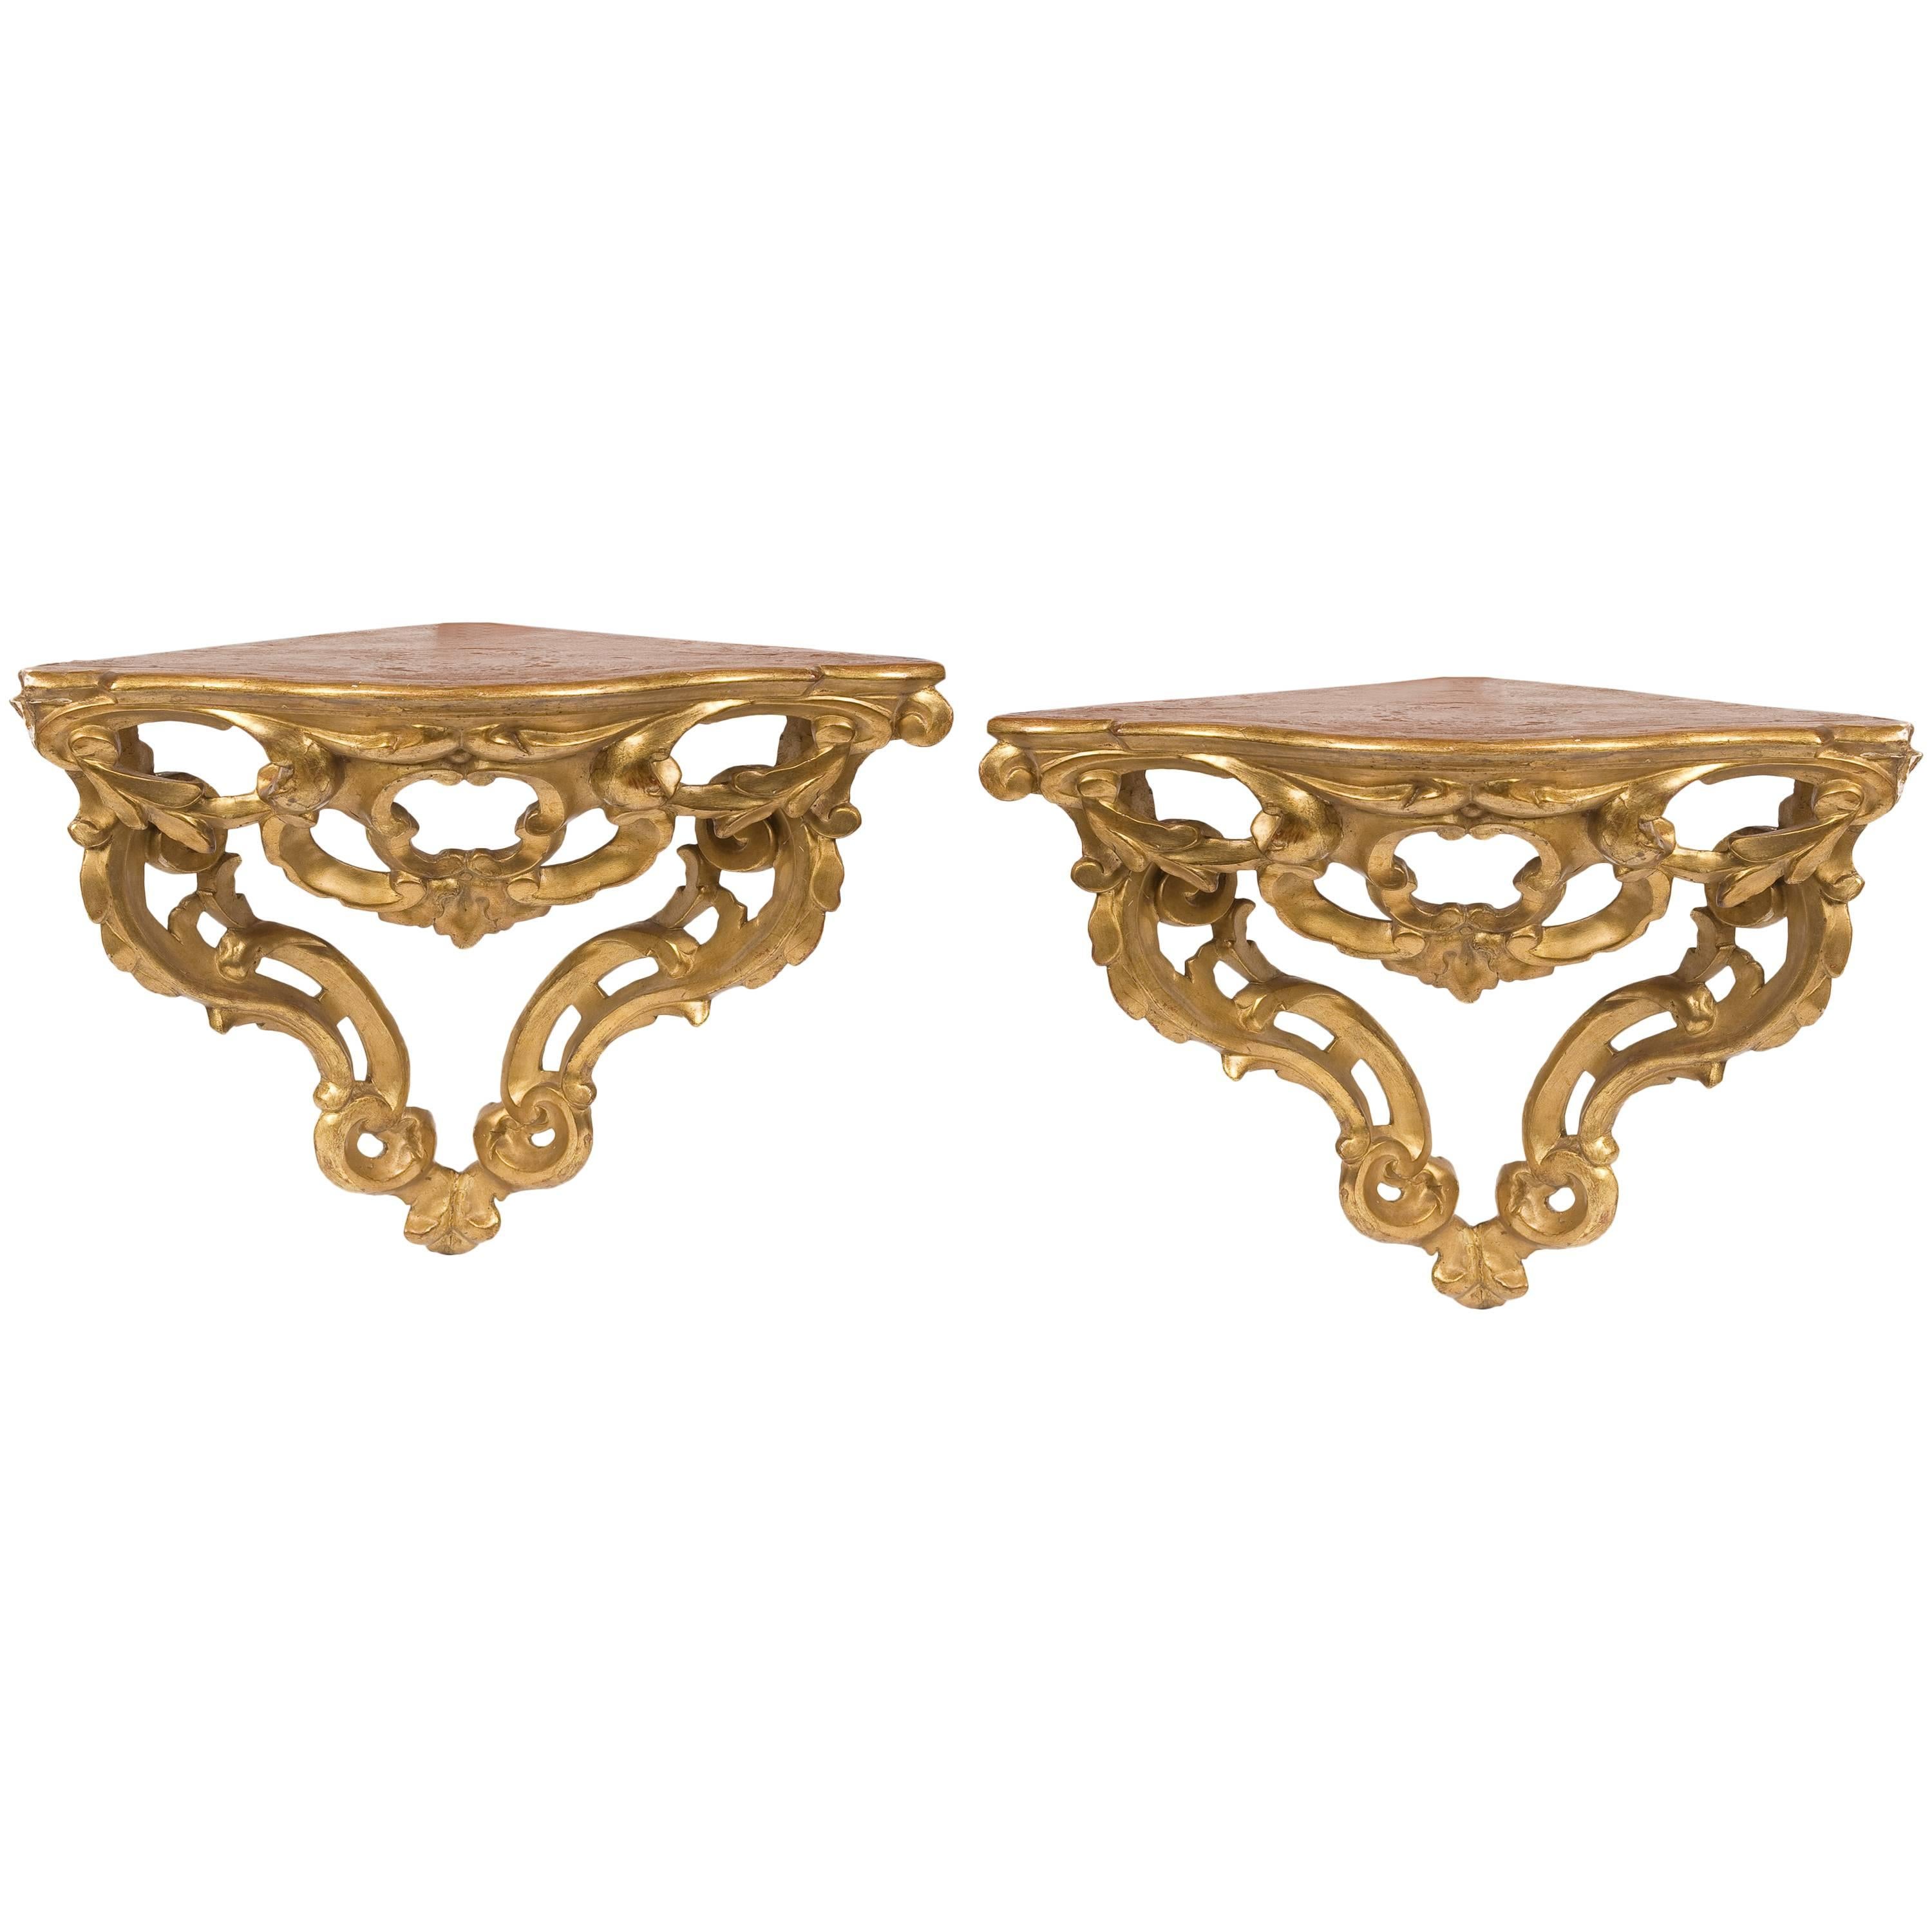 Two Spanish Corner Brackets in Gilded Wood, 18th Century For Sale